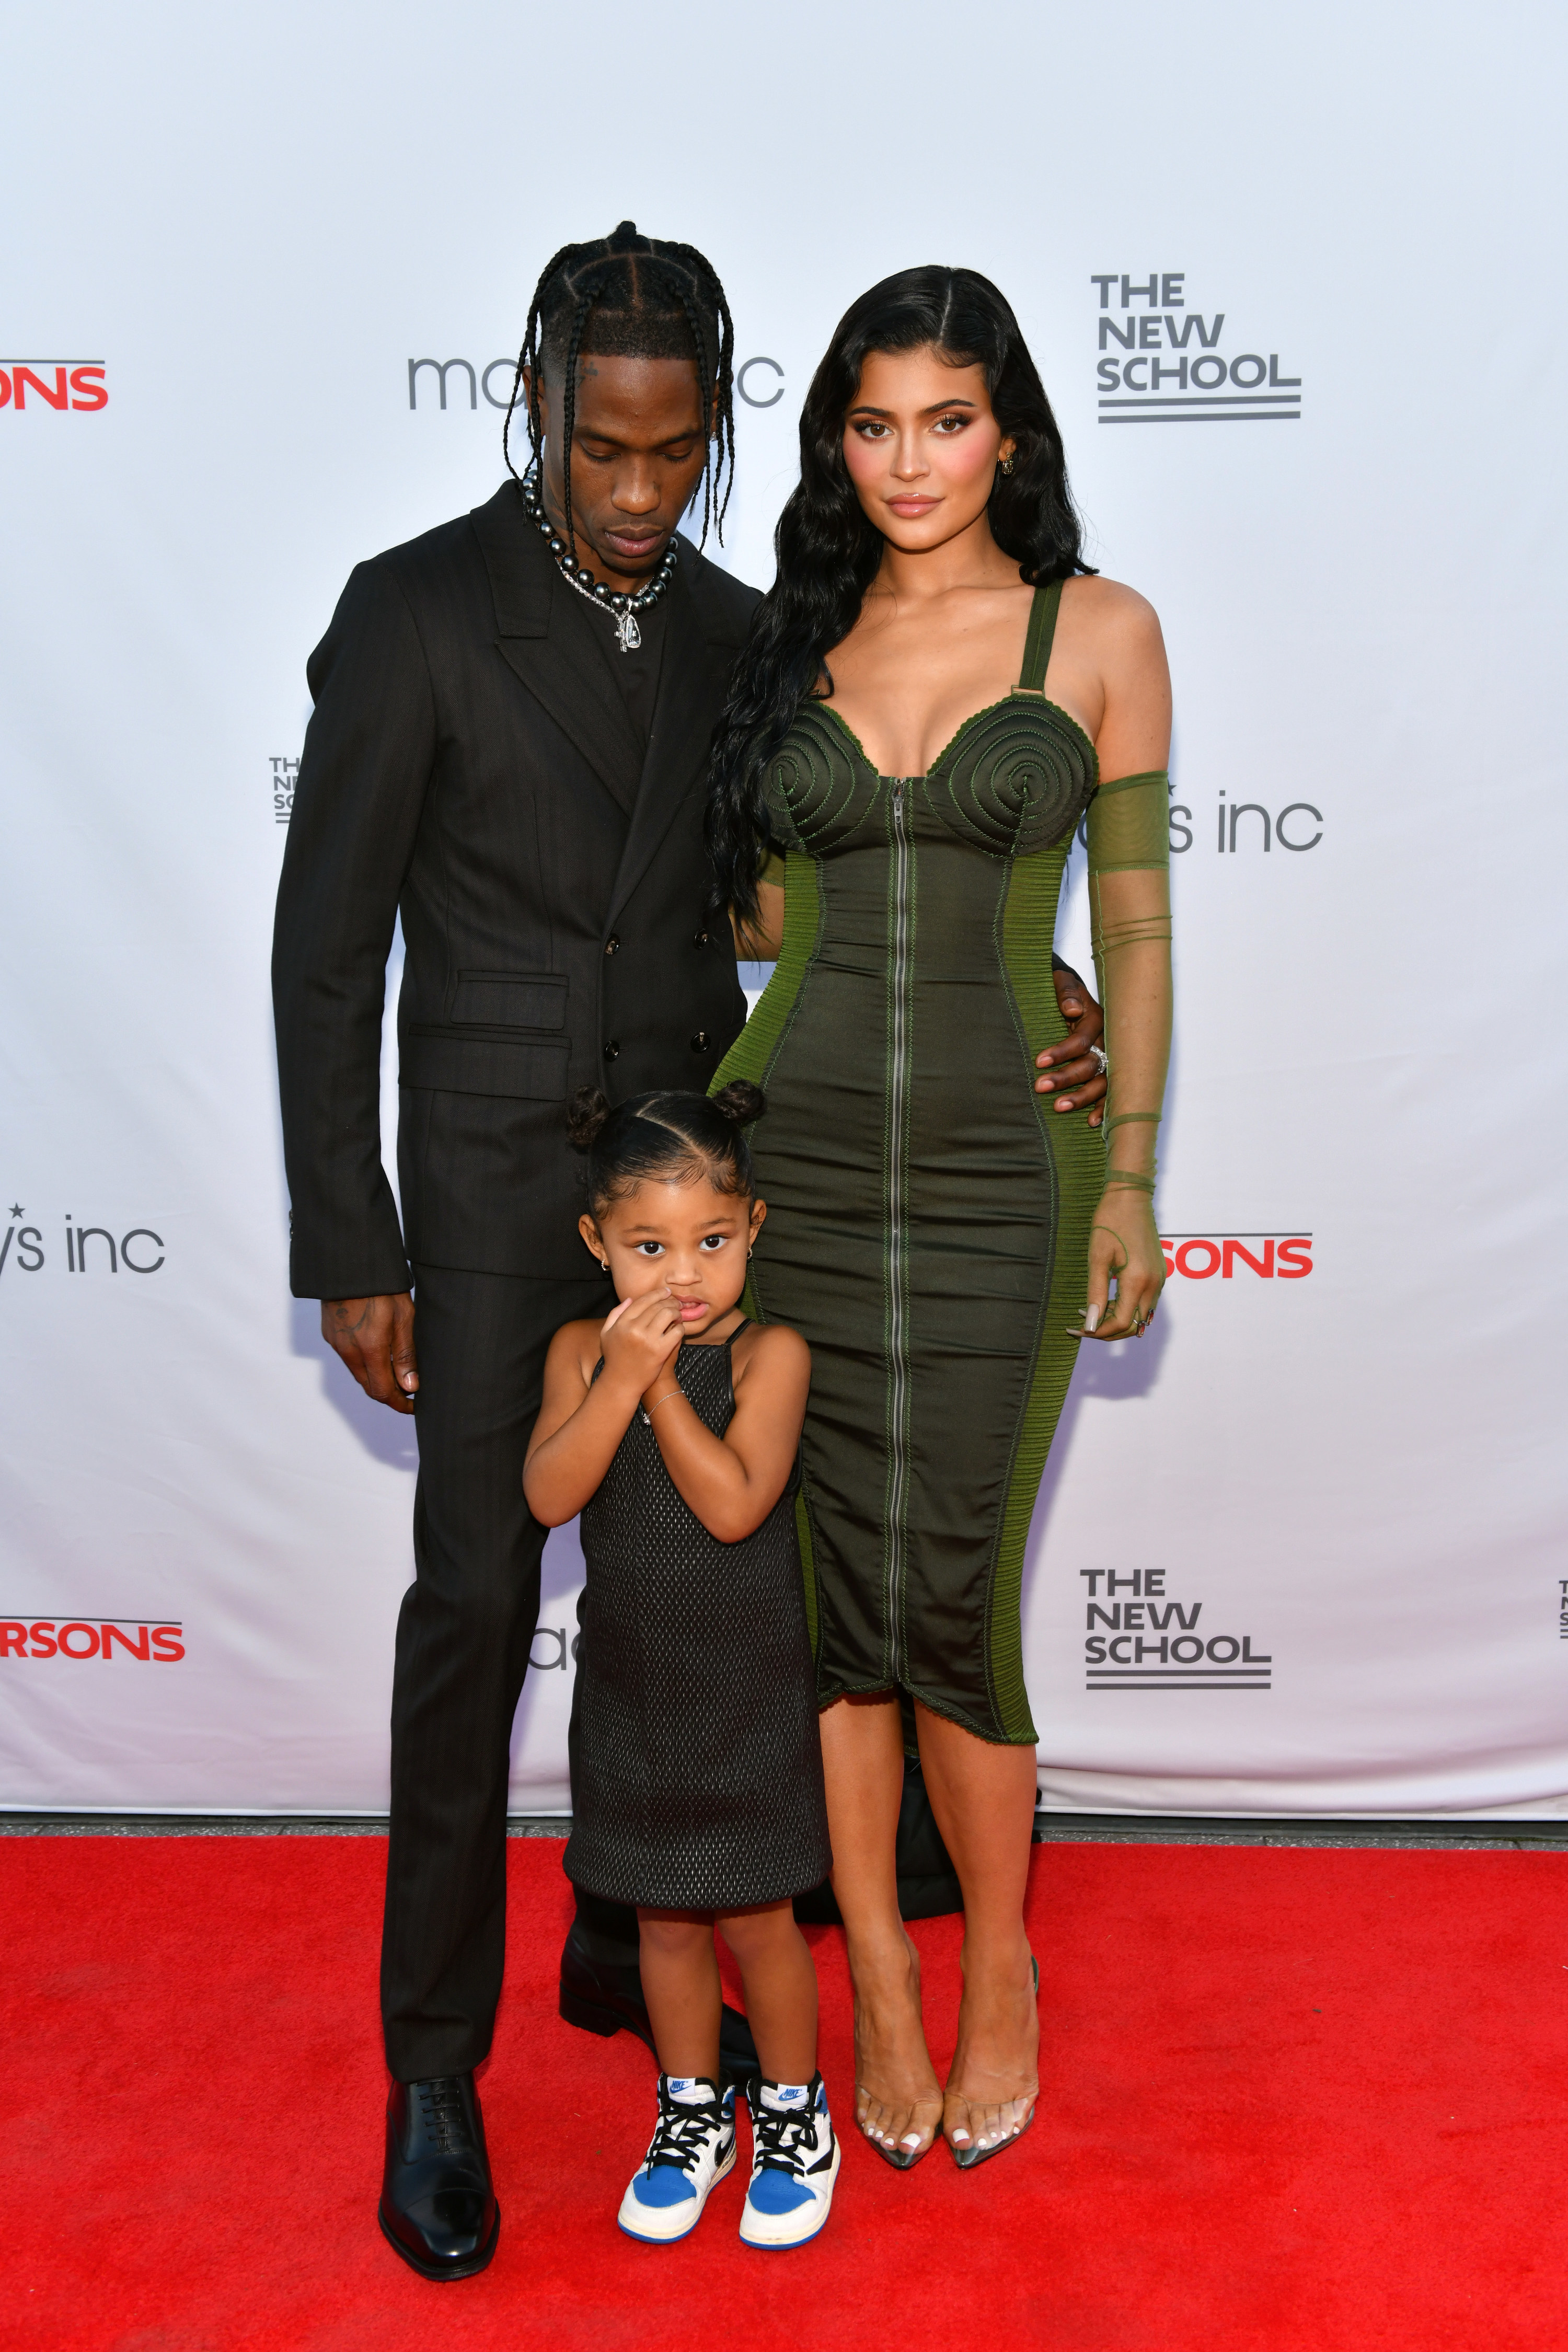 Travis, Kylie, and Stormi Webster pose for a photo on the red carpet